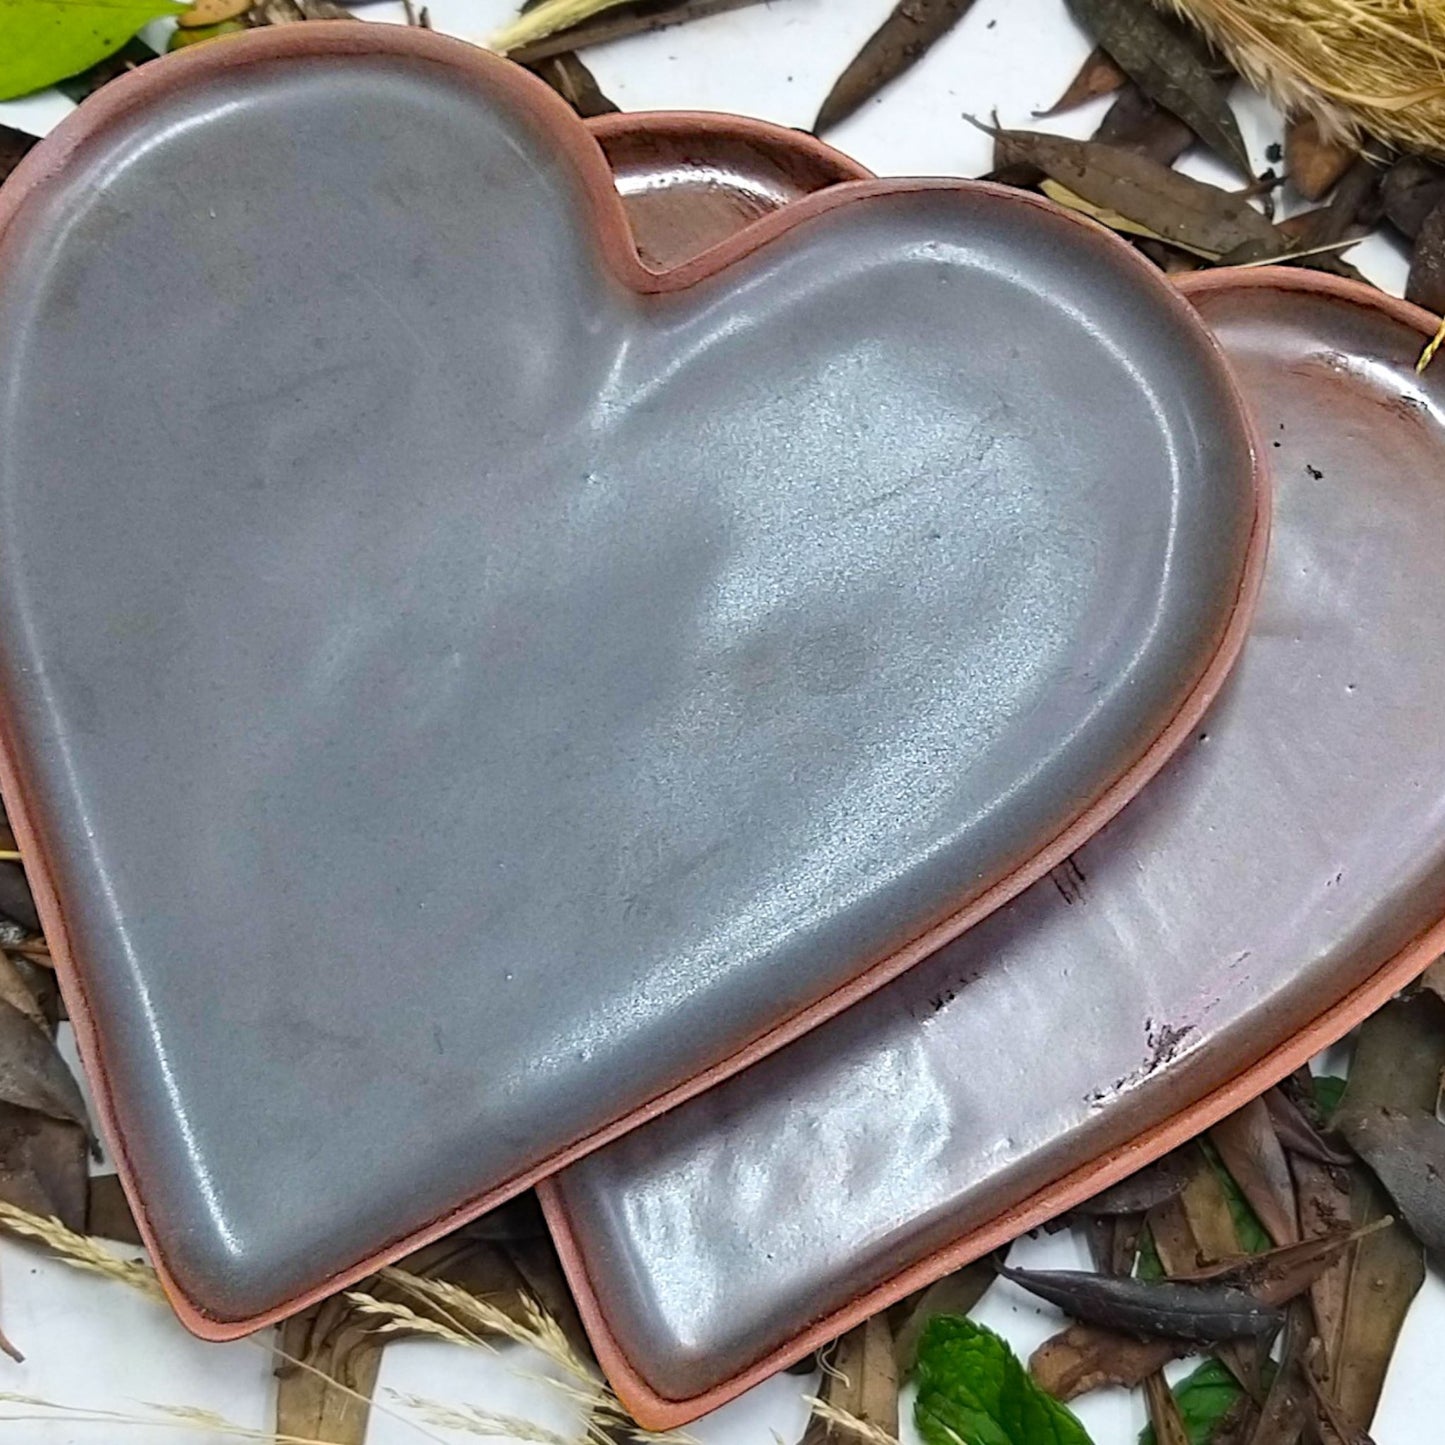 Heart shaped ceramic dish with chocolate brown finish